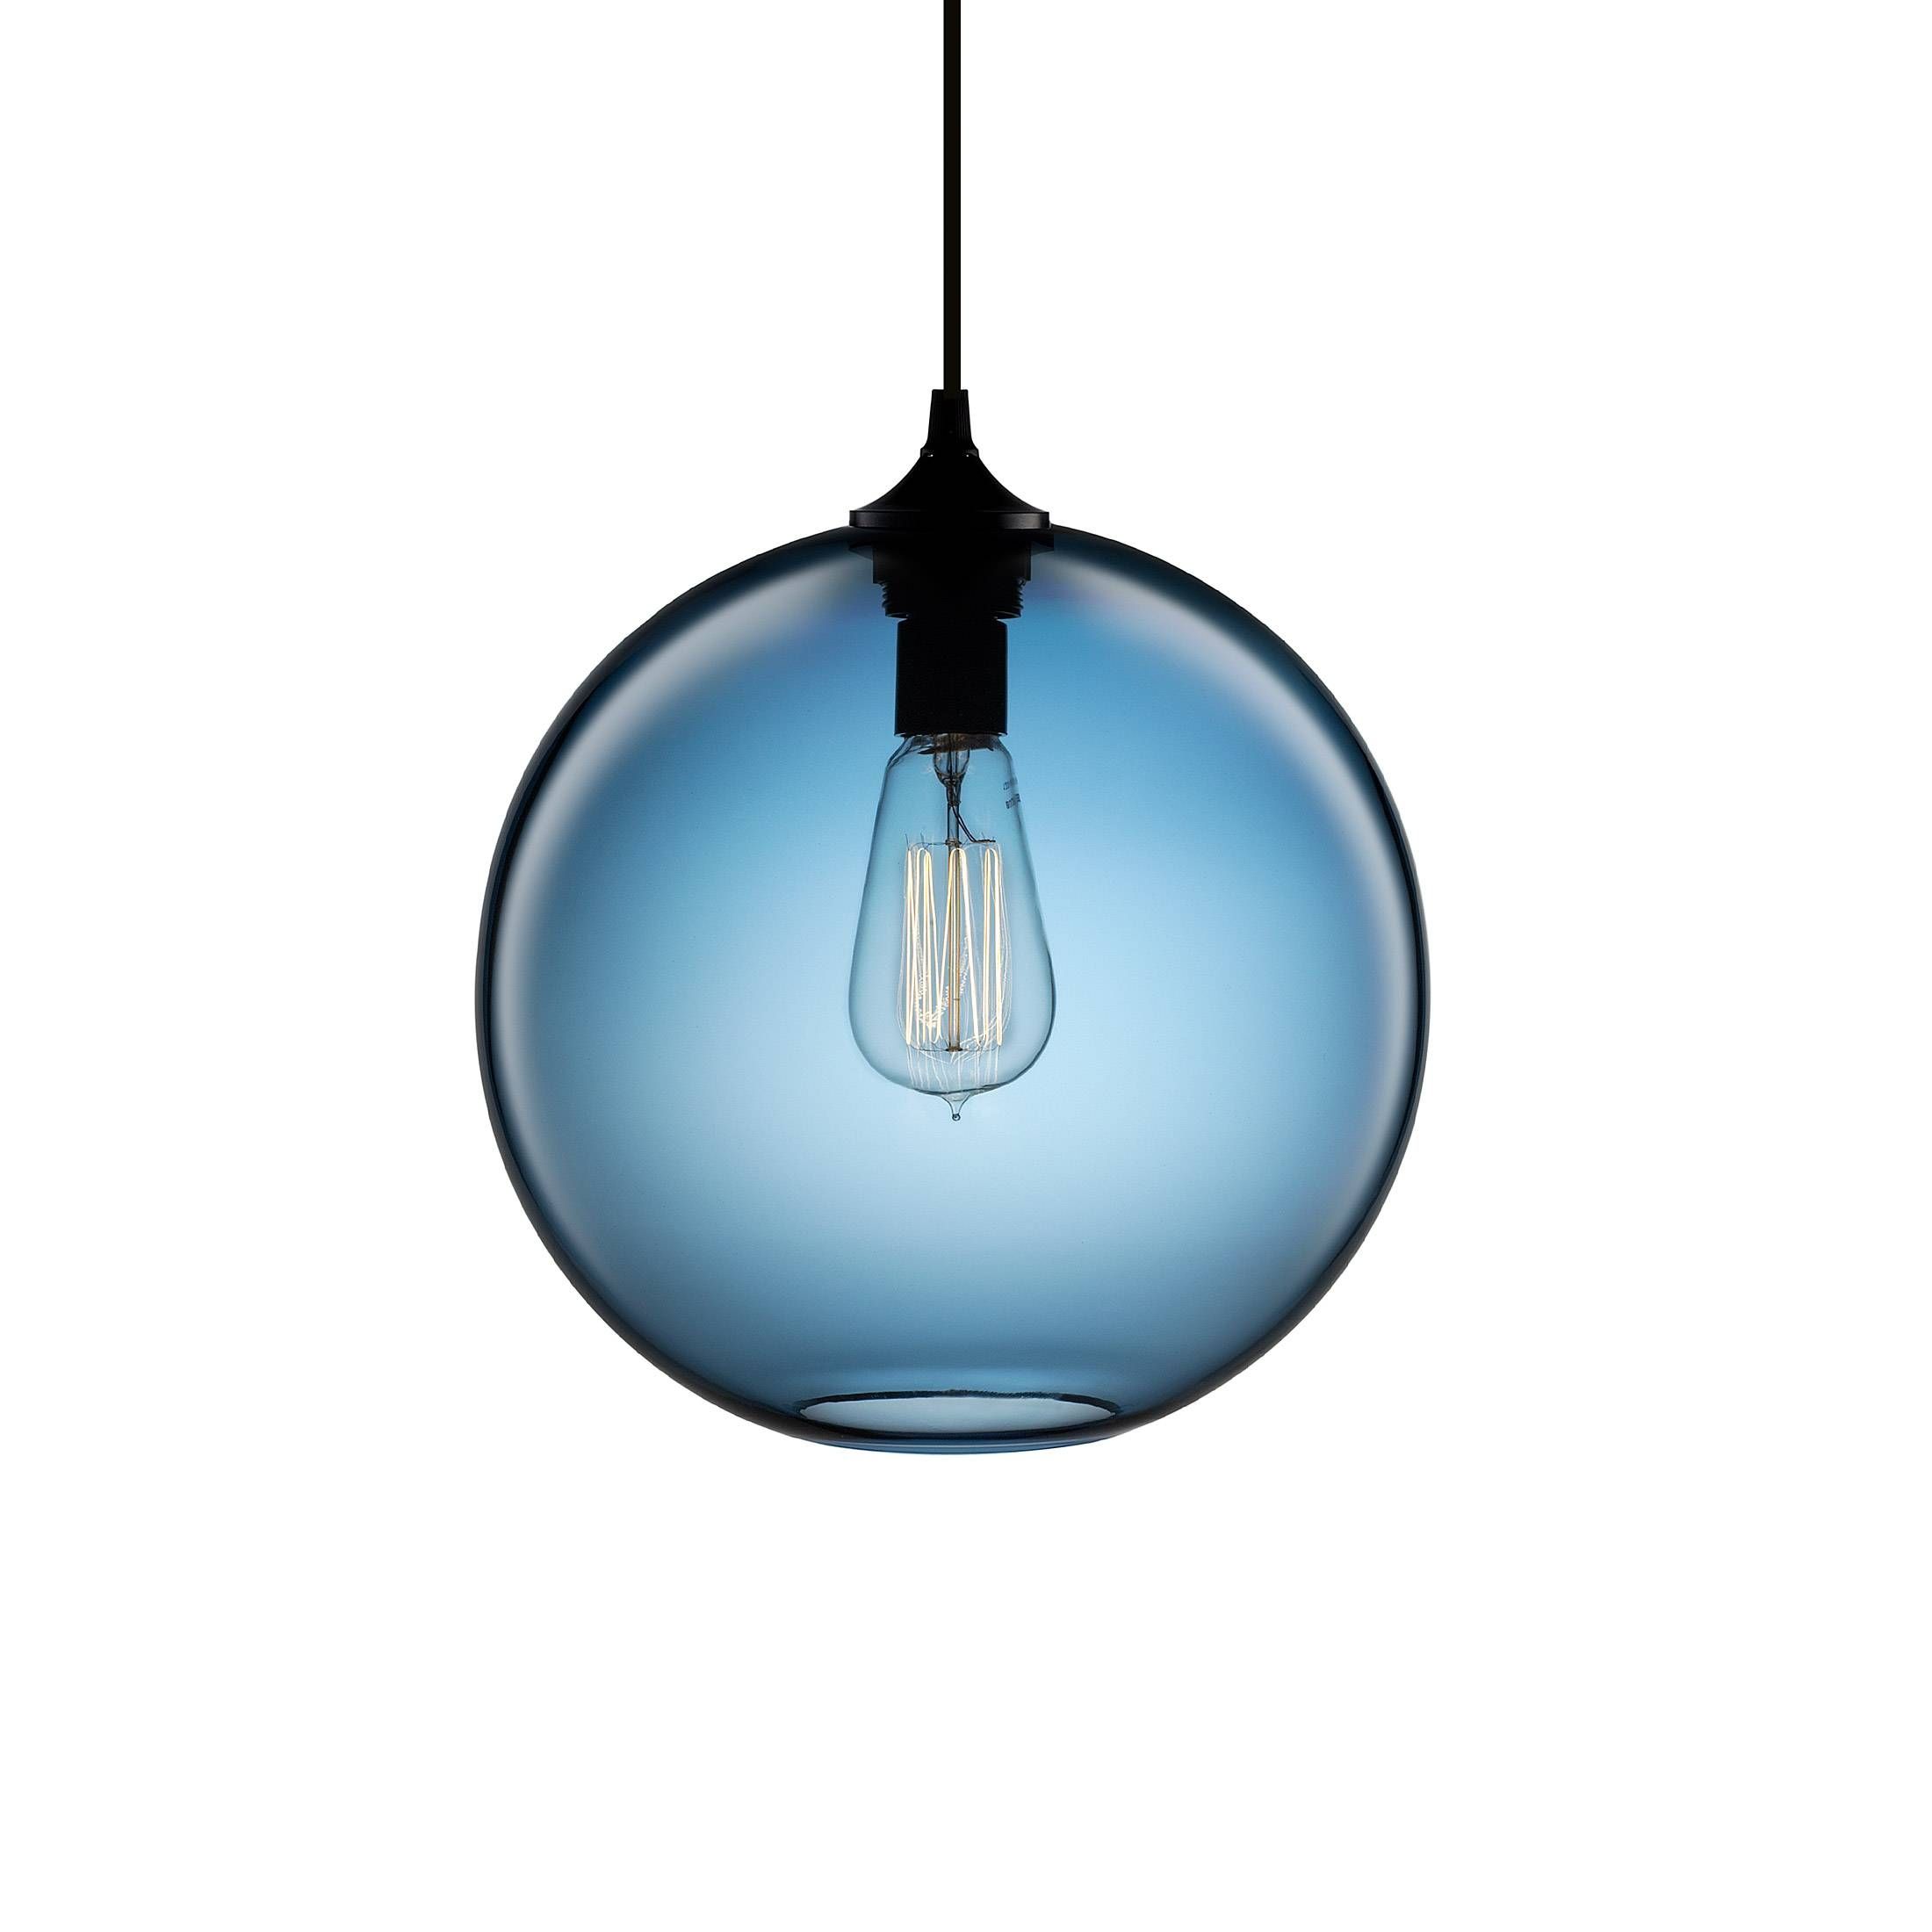 Lighting Design Ideas: Best Examples Of Blue Light Fixtures Good Intended For Blue Pendant Lights Fixtures (View 13 of 15)